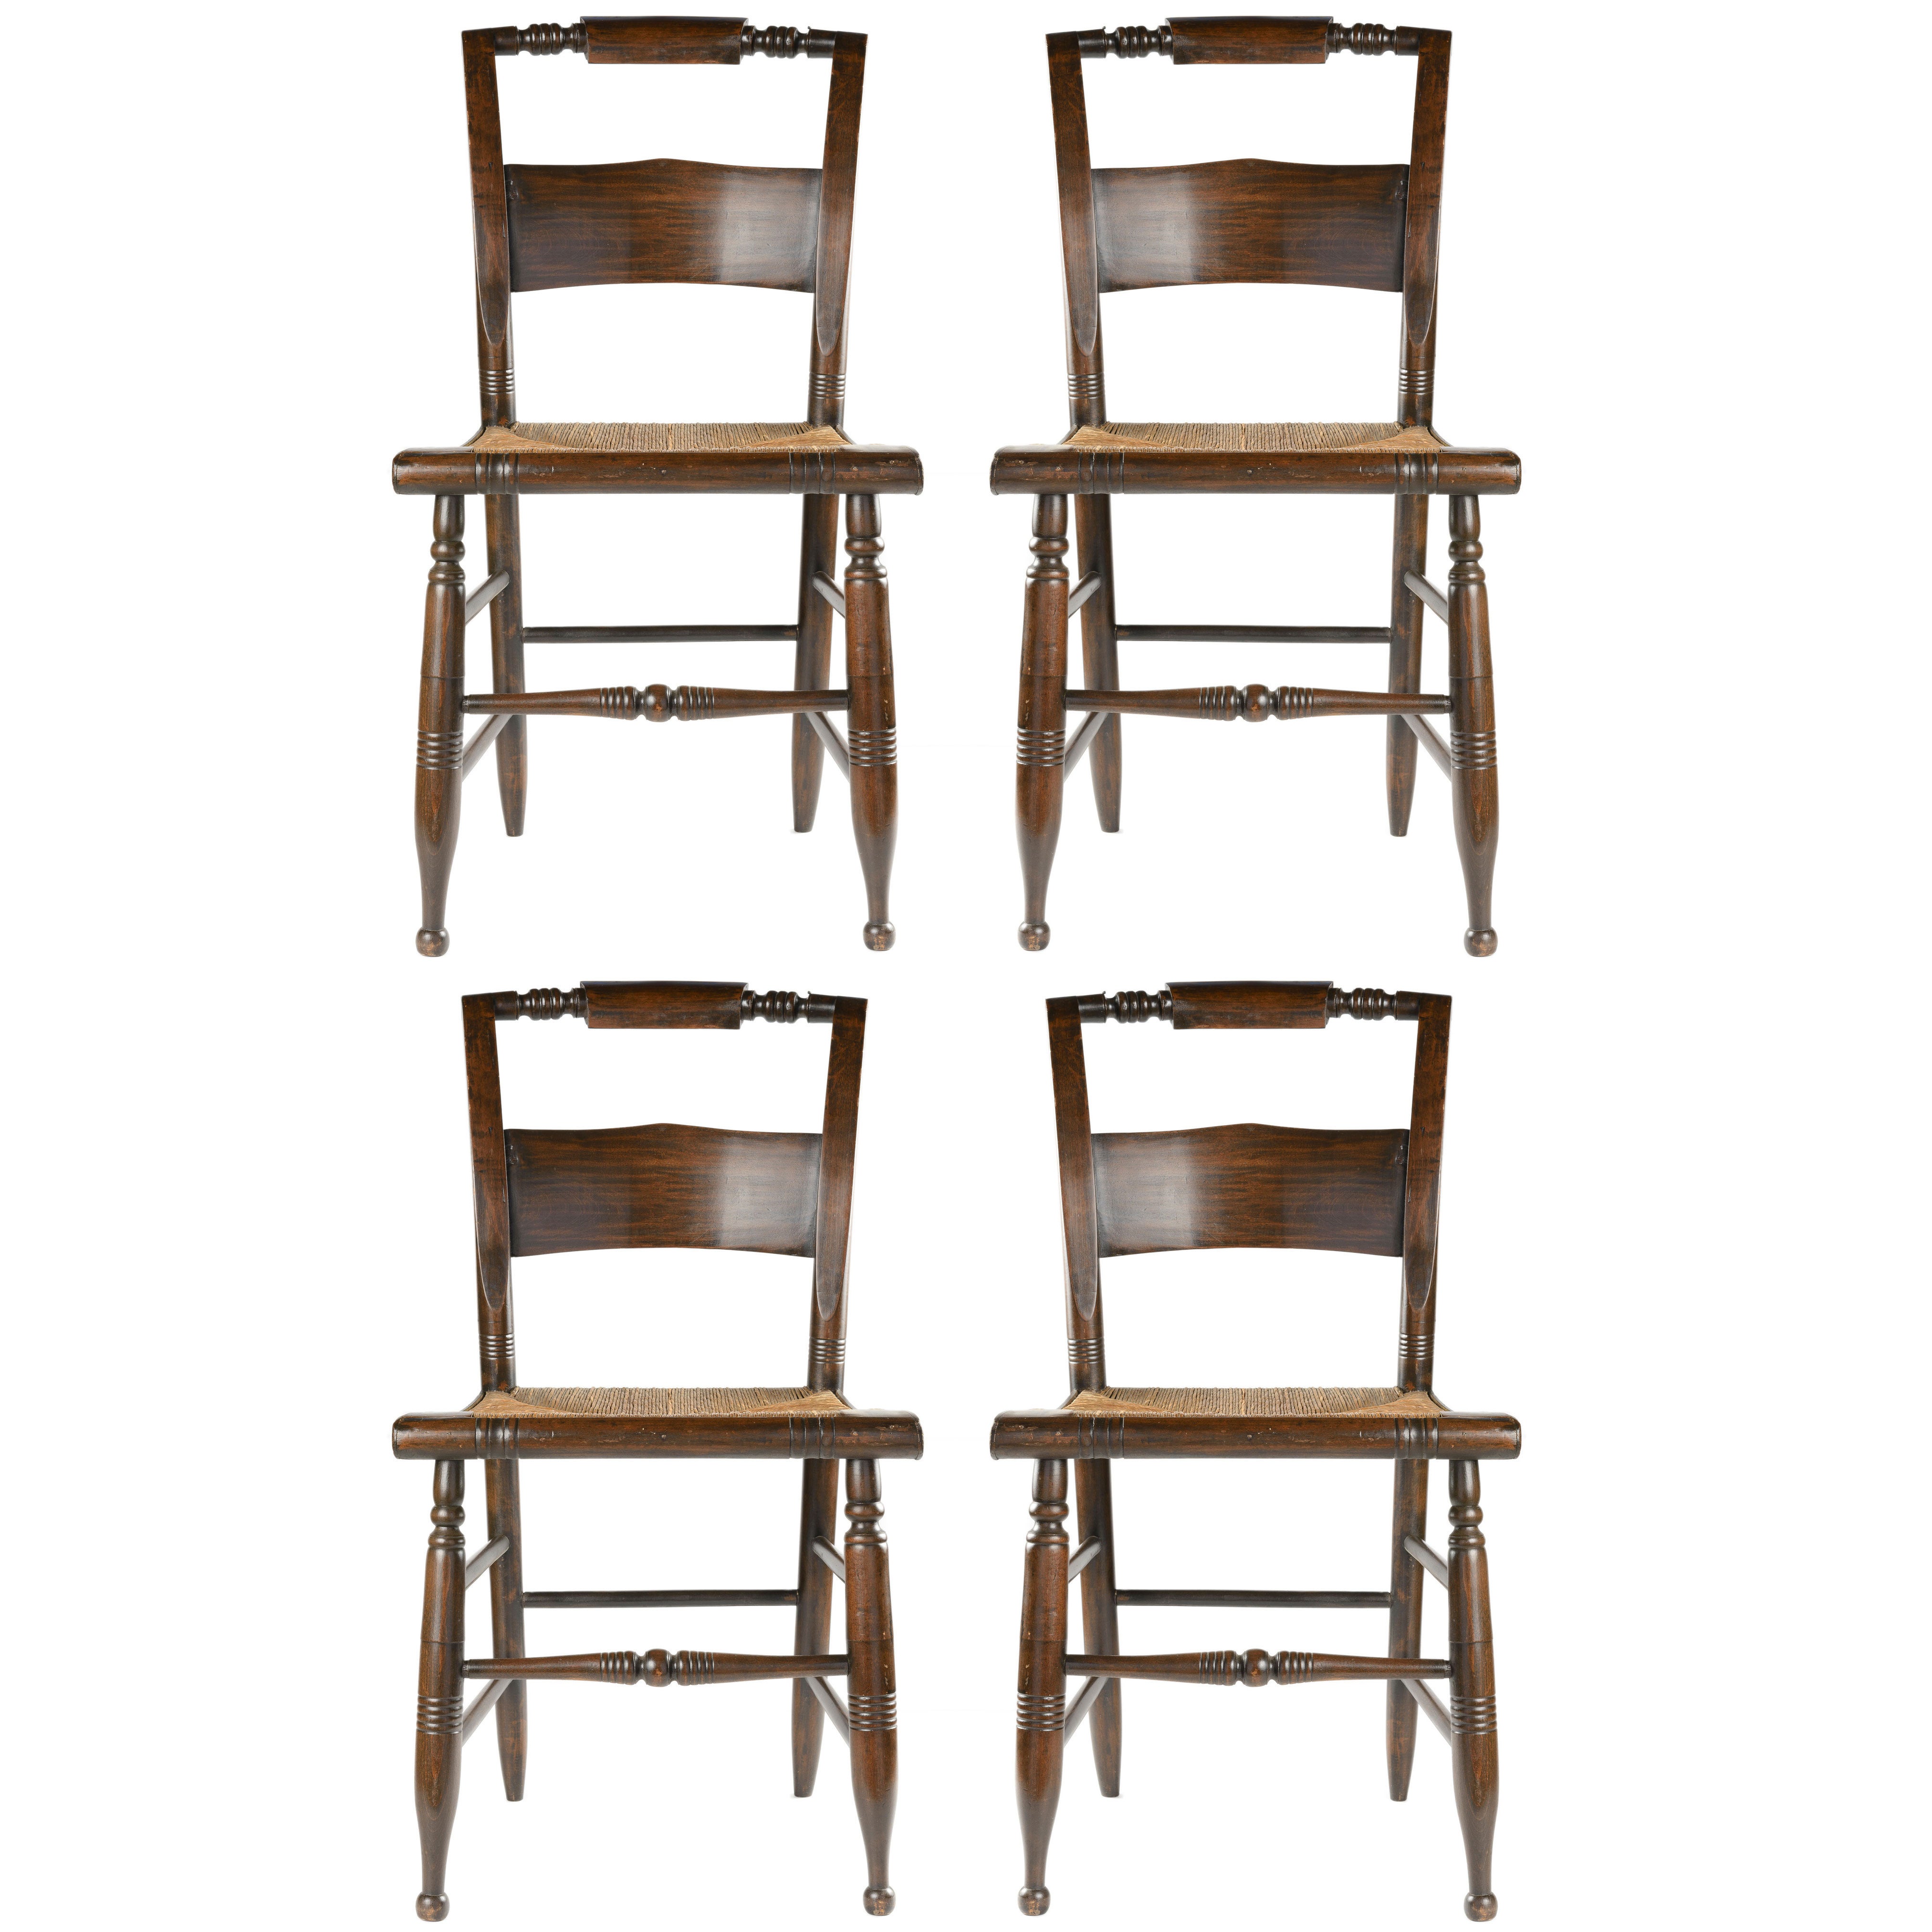 Set of Four Sheraton Style Hitchcock Chairs